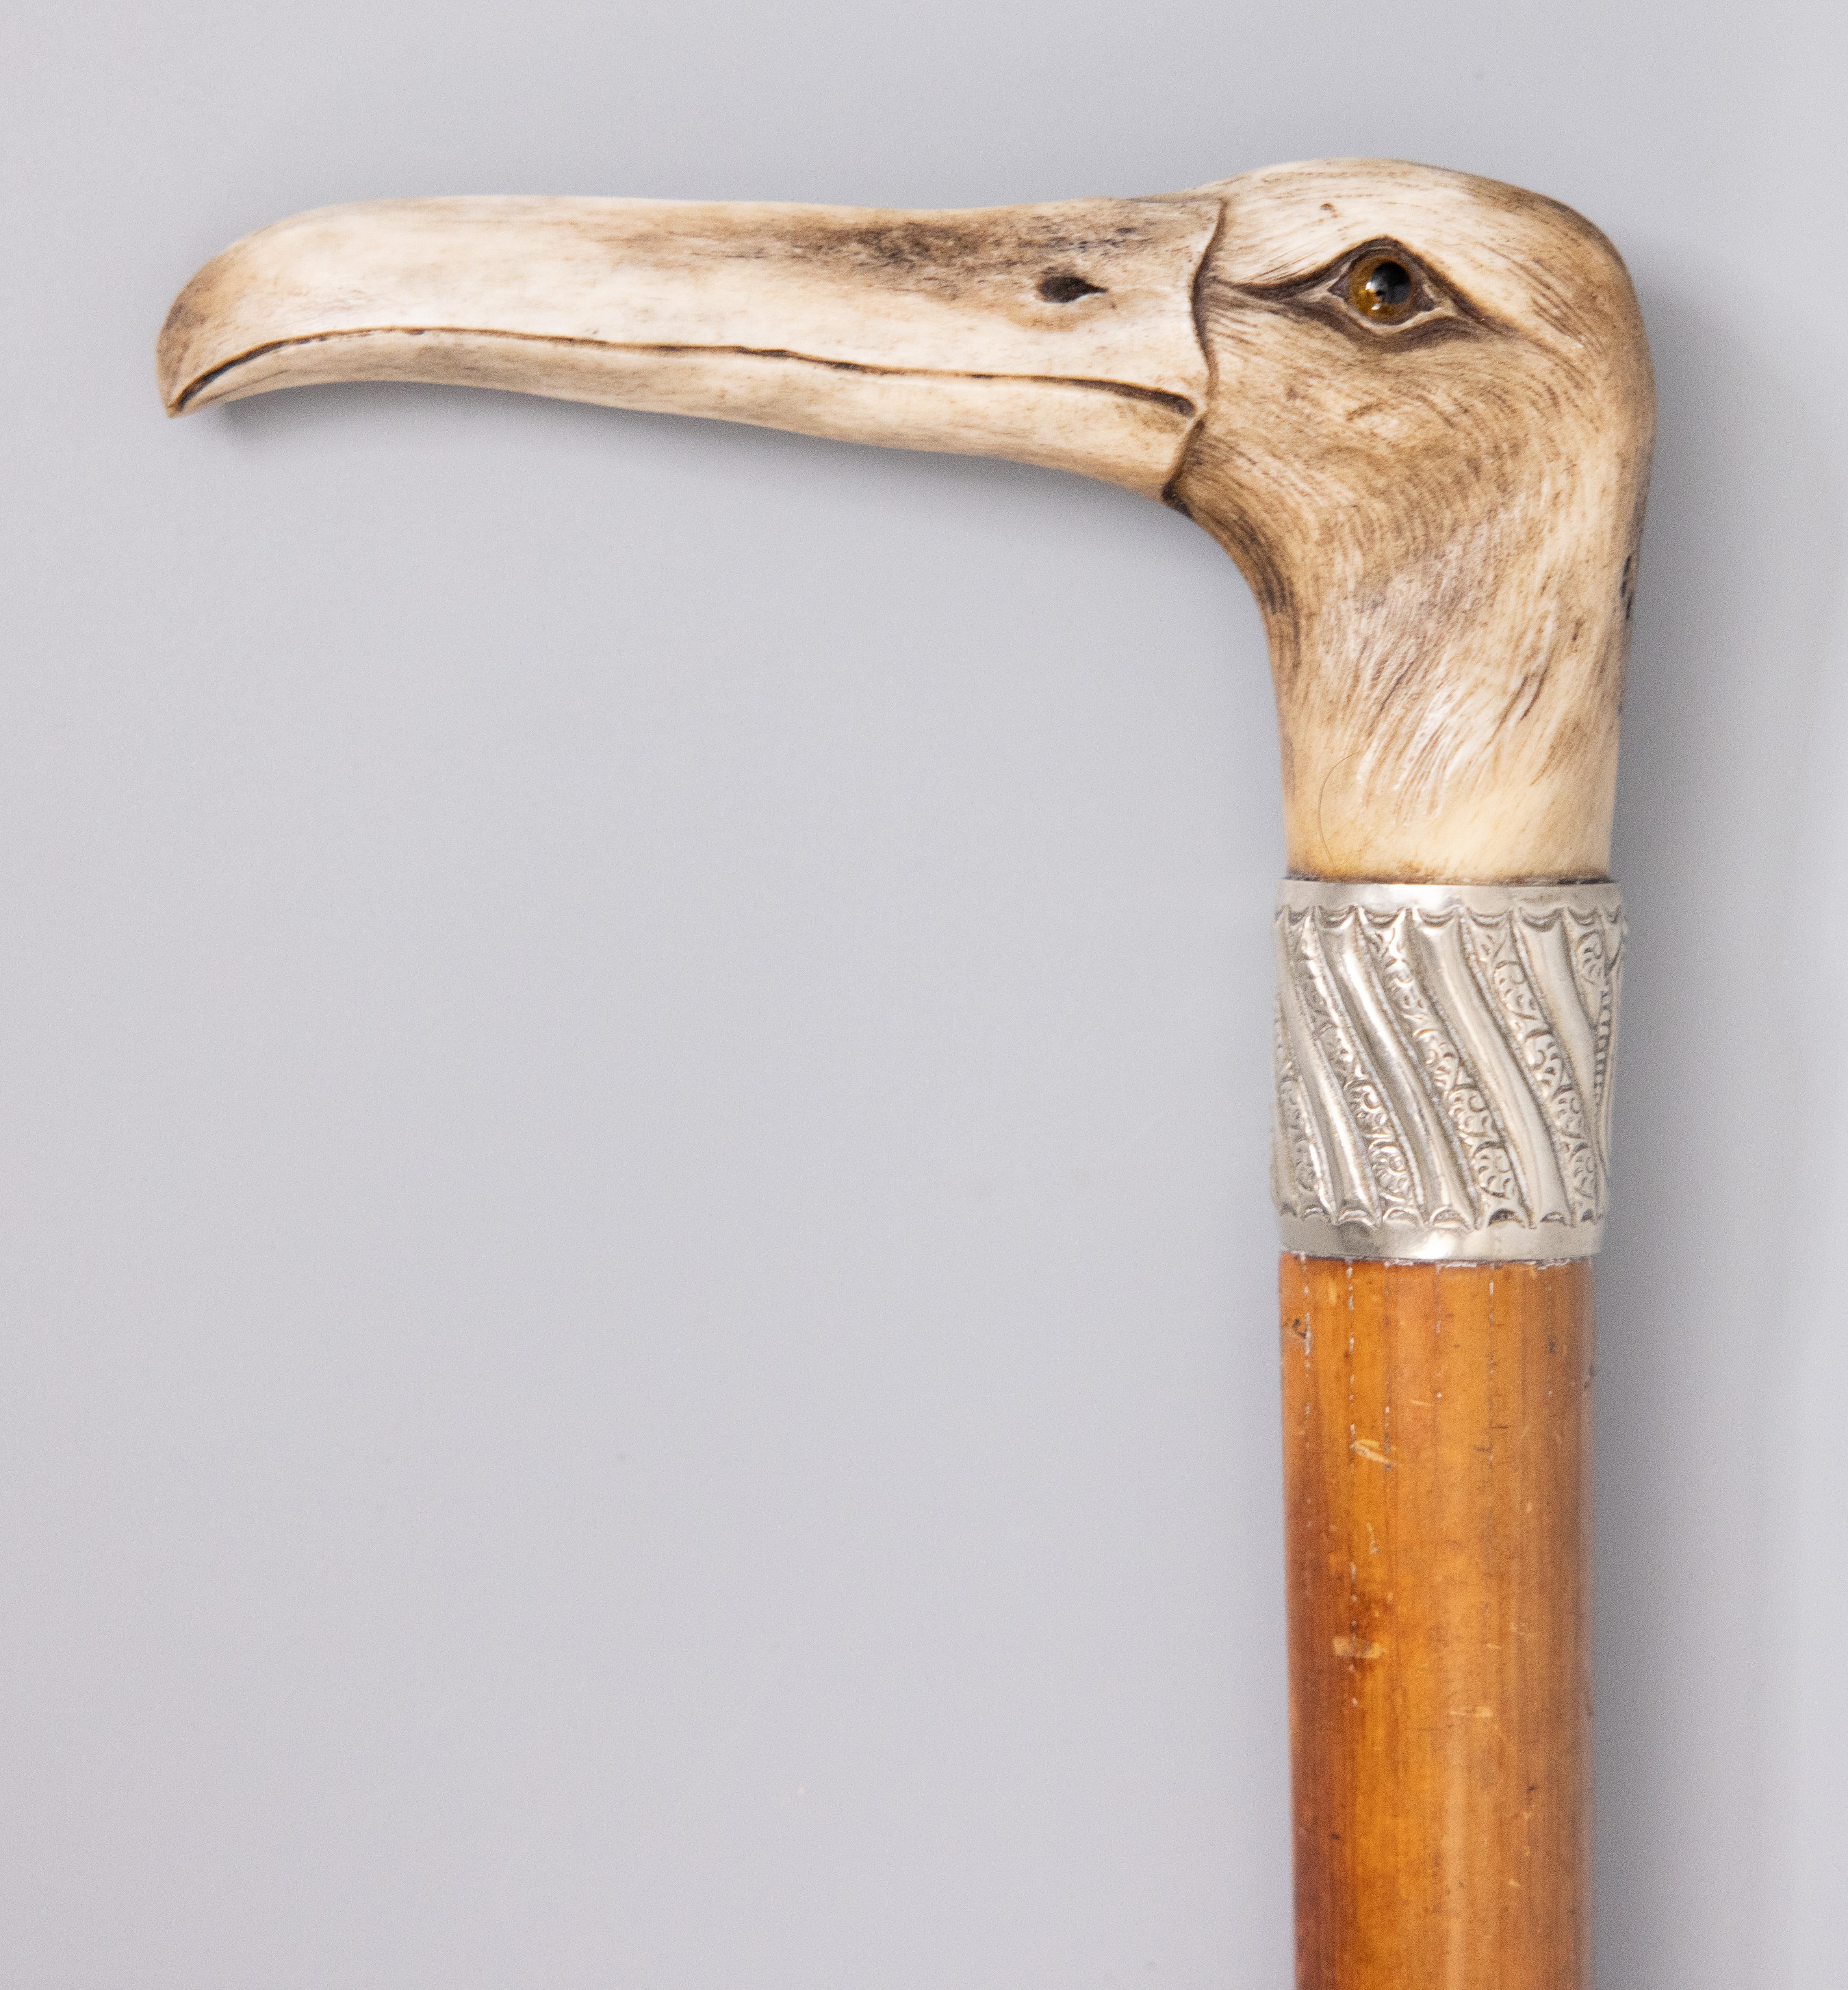 A superb antique 19th century English gentleman's walking stick with a carved stag Horn albatross bird handle. This handsome walking stick has a finely carved albatross handle with exquisite detail and glass eyes, mahogany wood shaft, and decorative